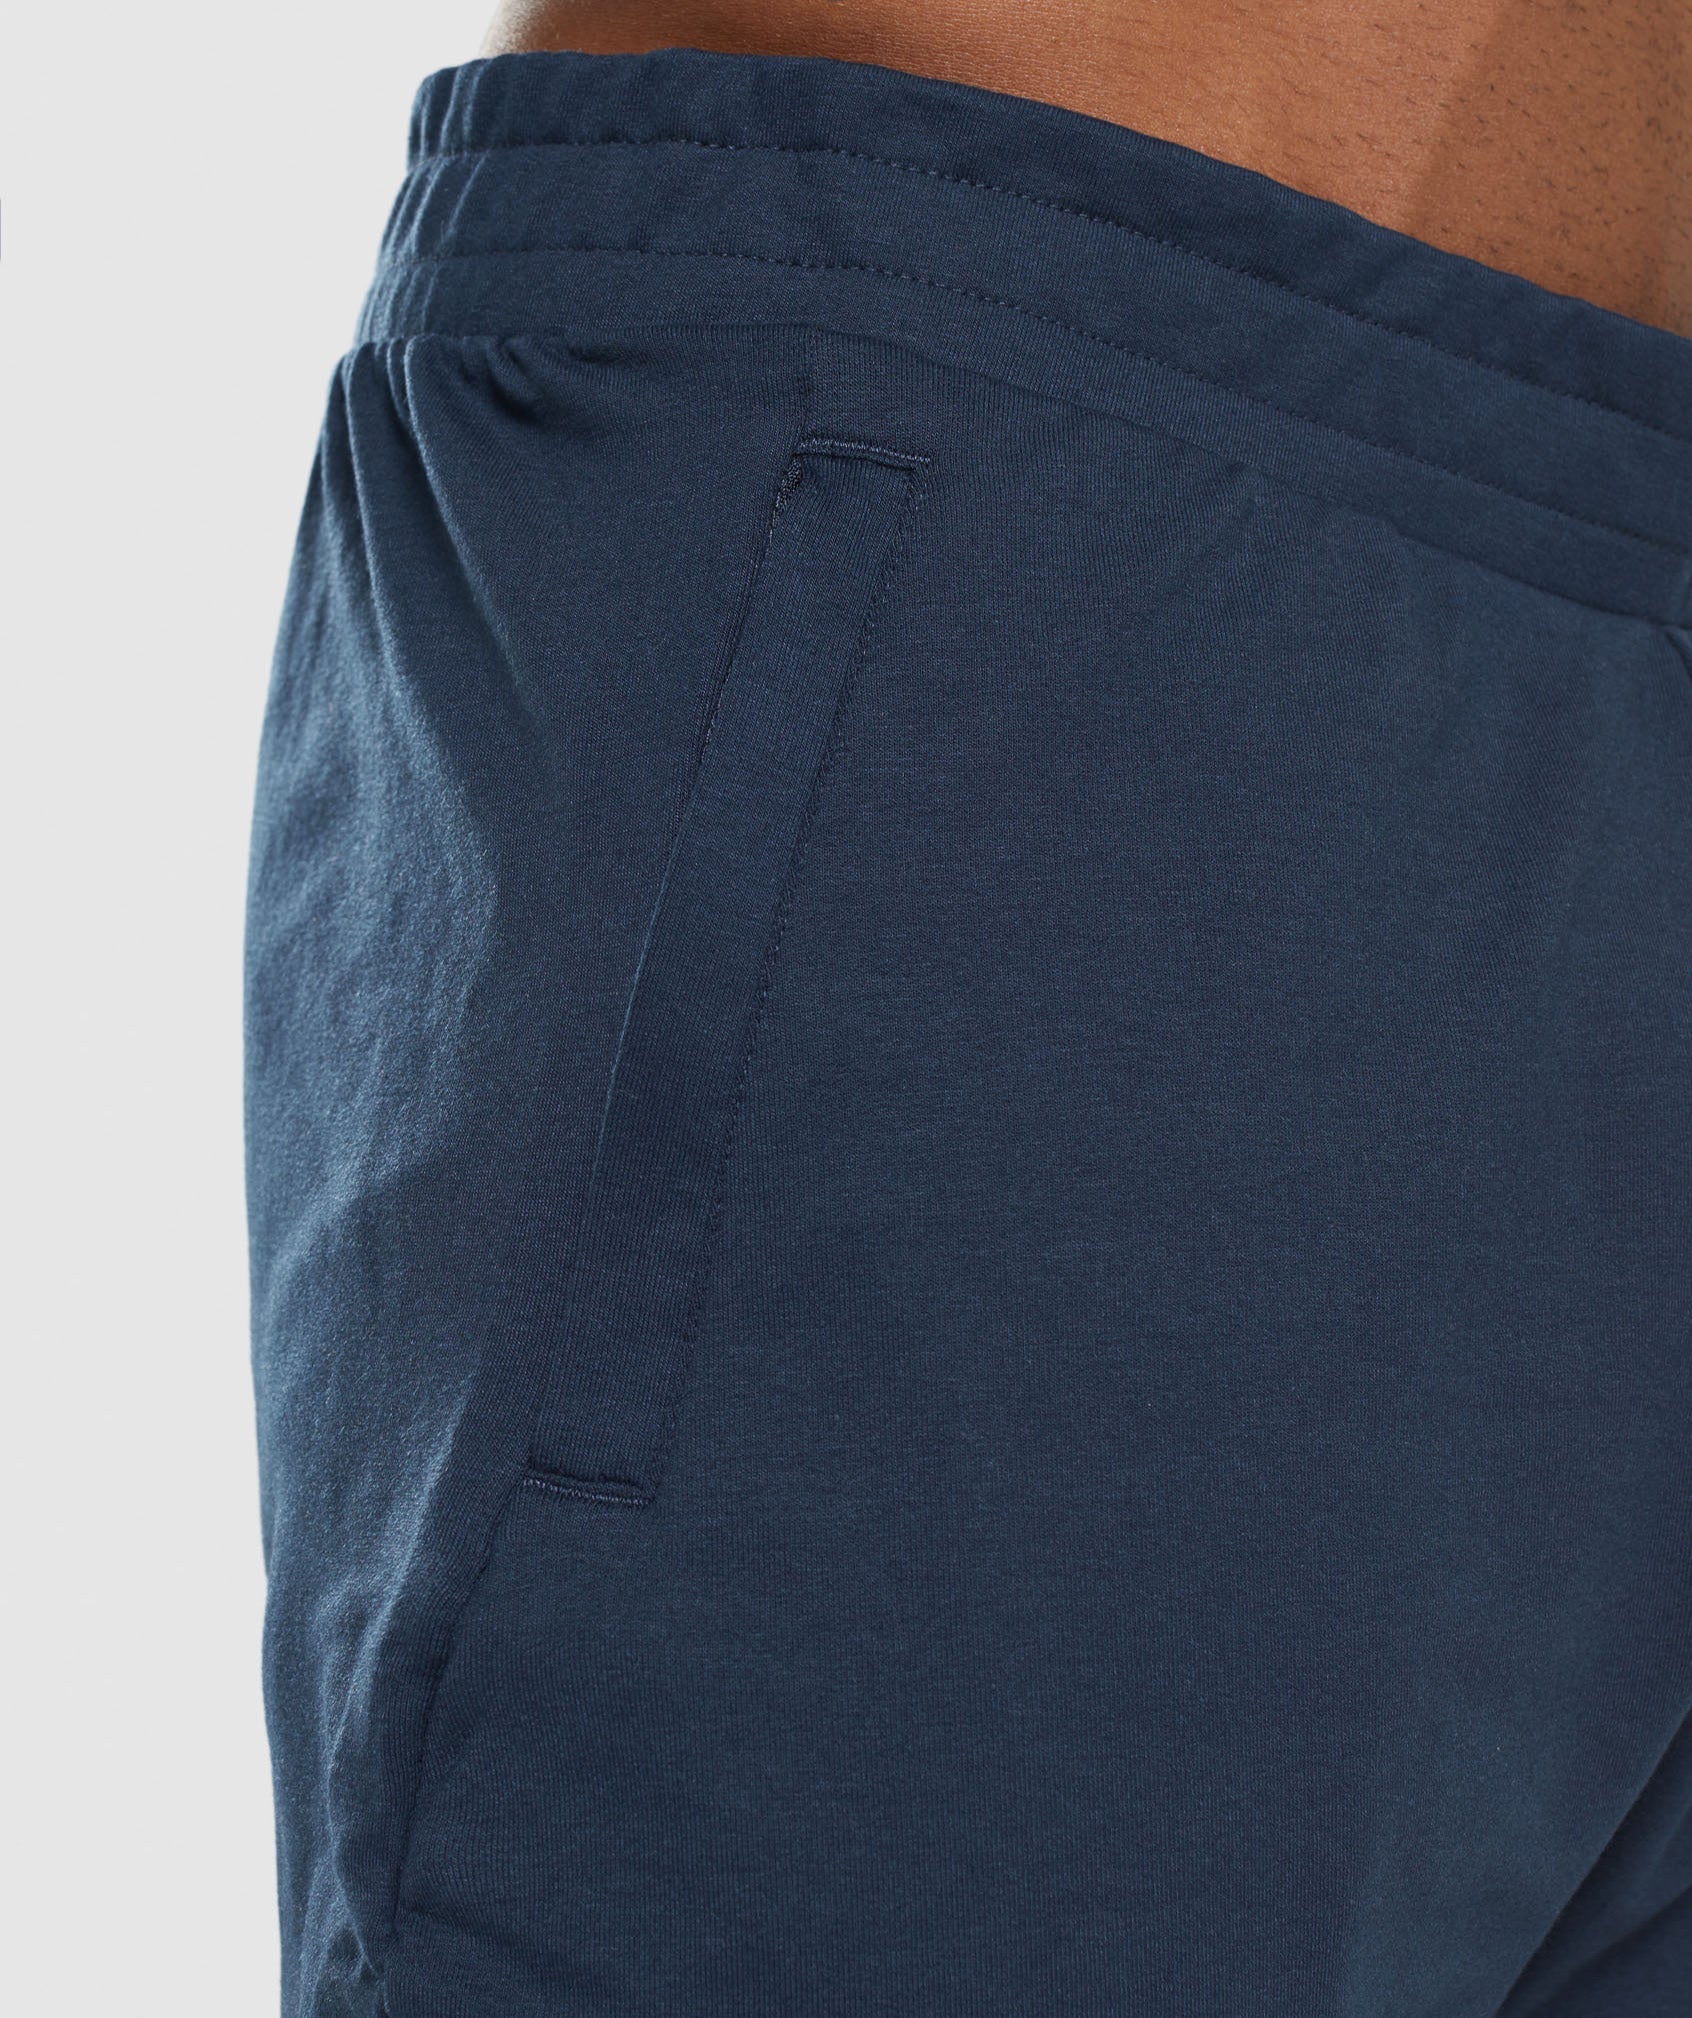 Critical Pant in Navy